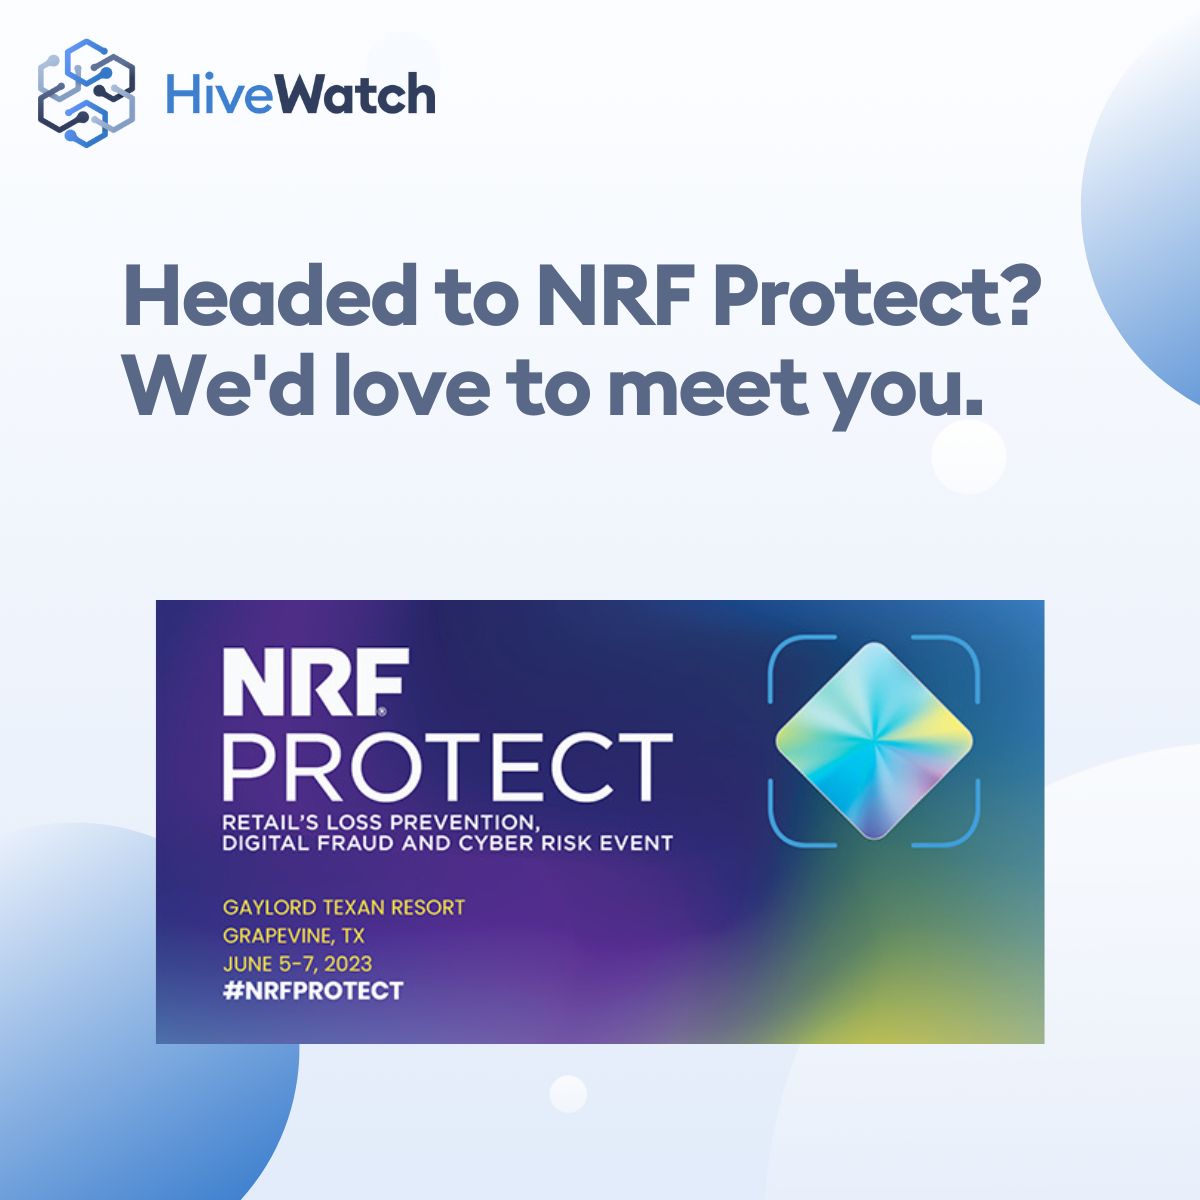 #ICYMI: We're headed to #NRFProtect in Dallas, June 5-7, and we want to meet you! 

HiveWatch is eager to highlight how #tech-enabled #physicalsecurity can give #retailers their power back. Email info@hivewatch.com to schedule some time with us. 

#lossprevention #retailsecurity